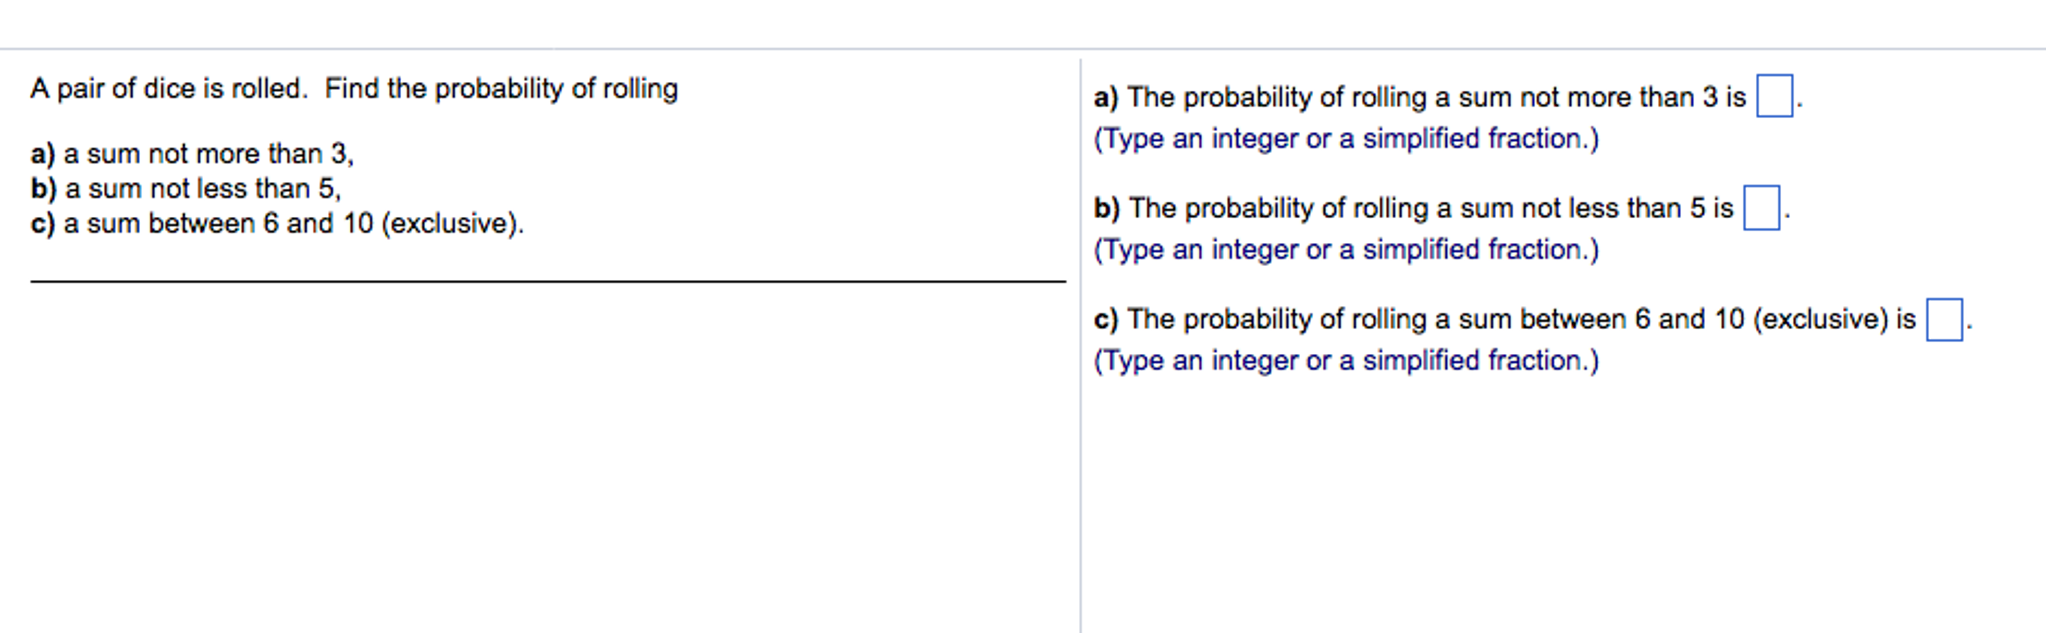 solved-a-pair-of-dice-is-rolled-find-the-probability-of-chegg